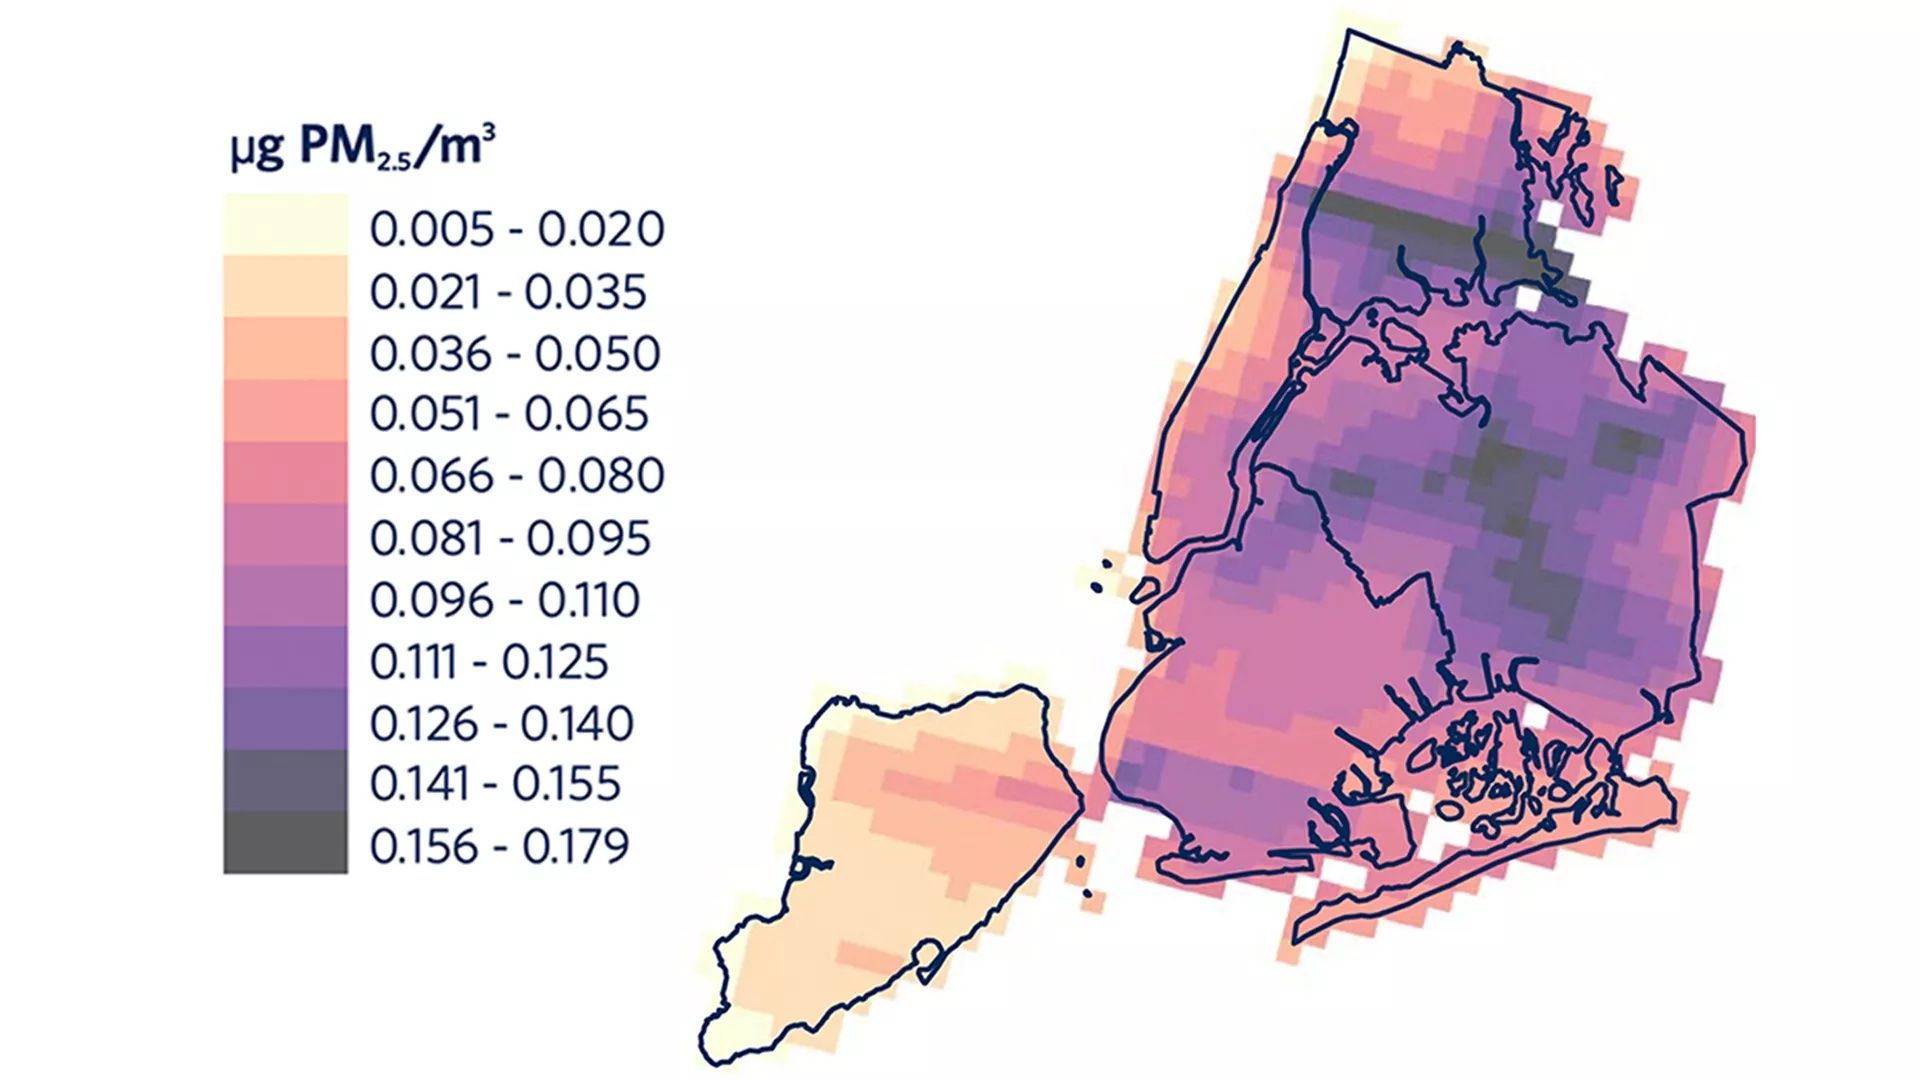 Image shows diesel truck emissions in New York City